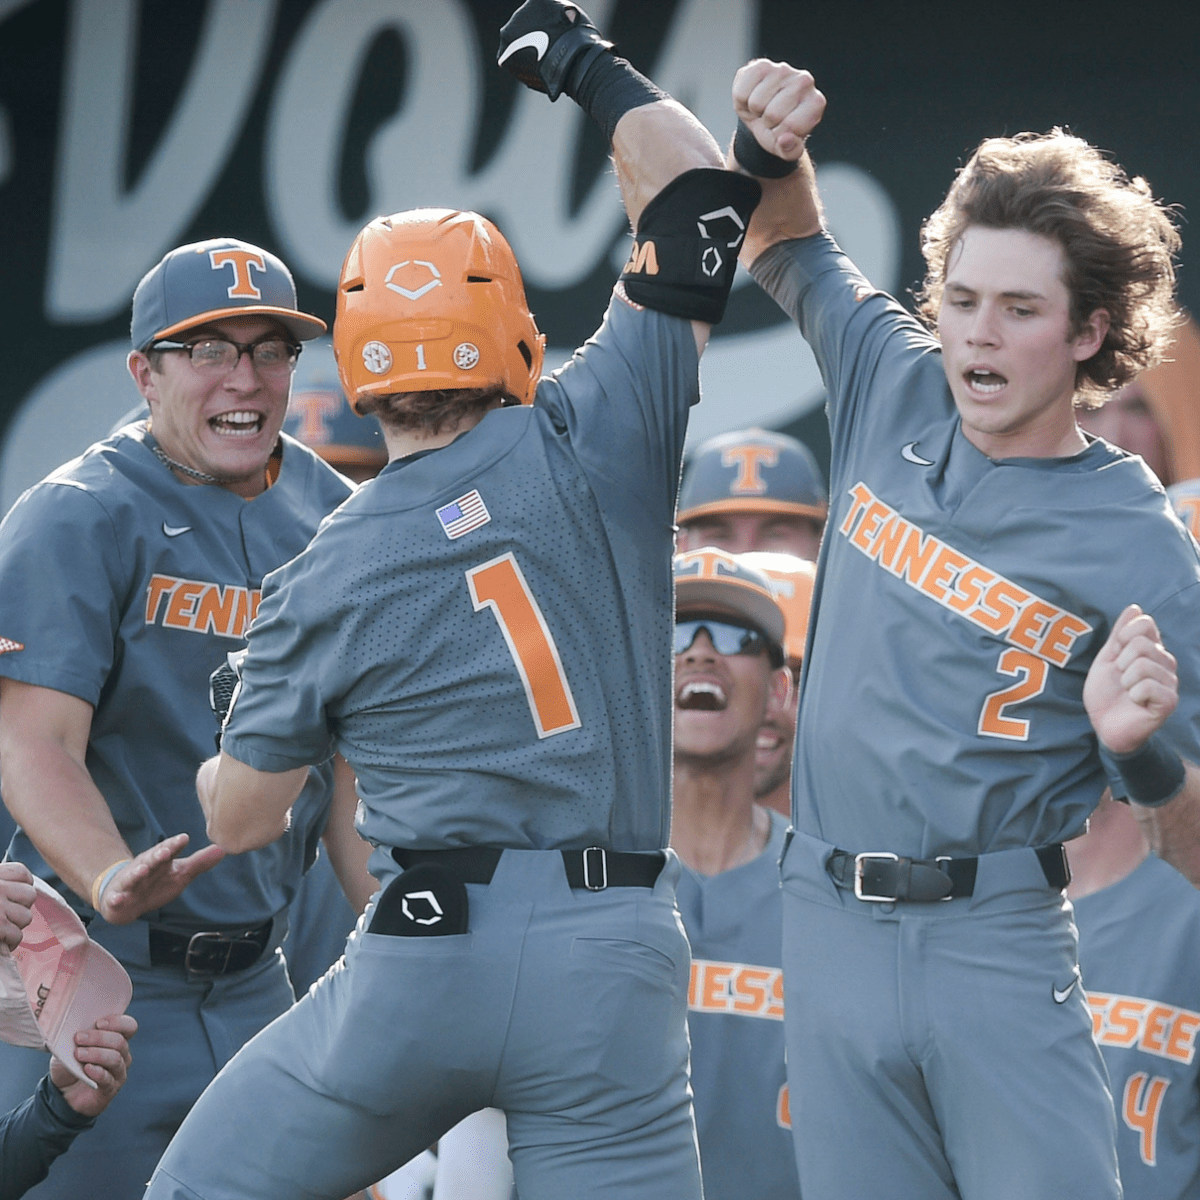 Former Tennessee Vols baseball star involved in scary play - A to